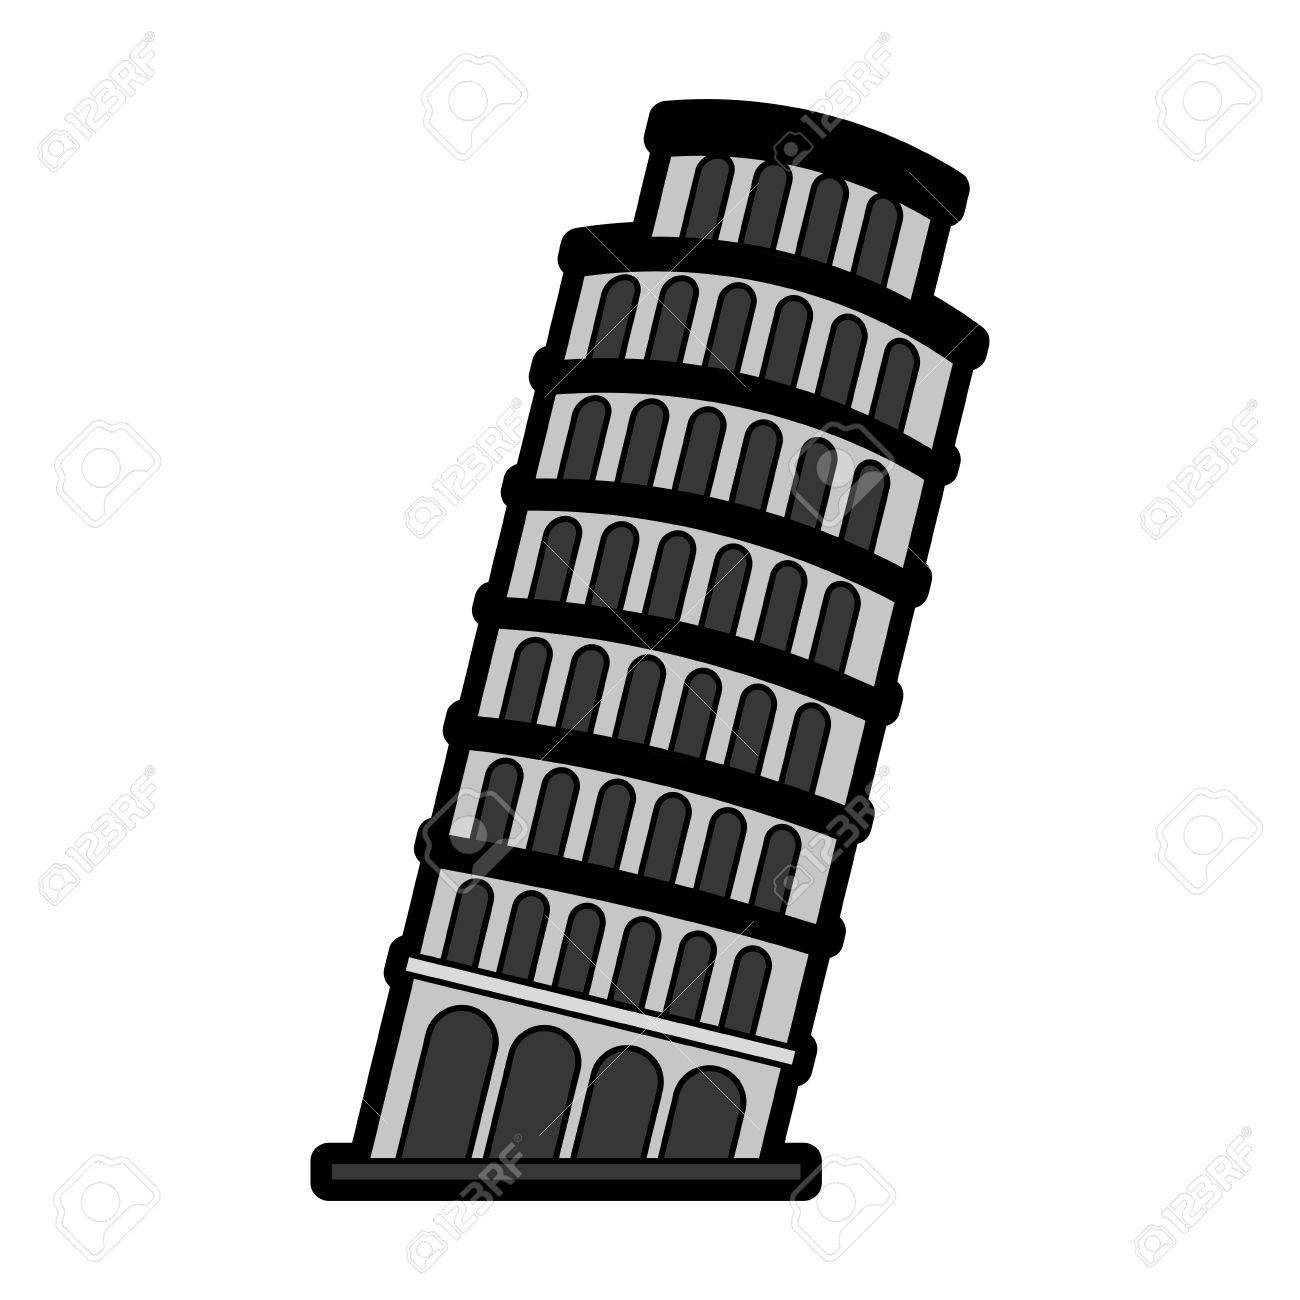 The Leaning Tower Of Pisa Clipart.